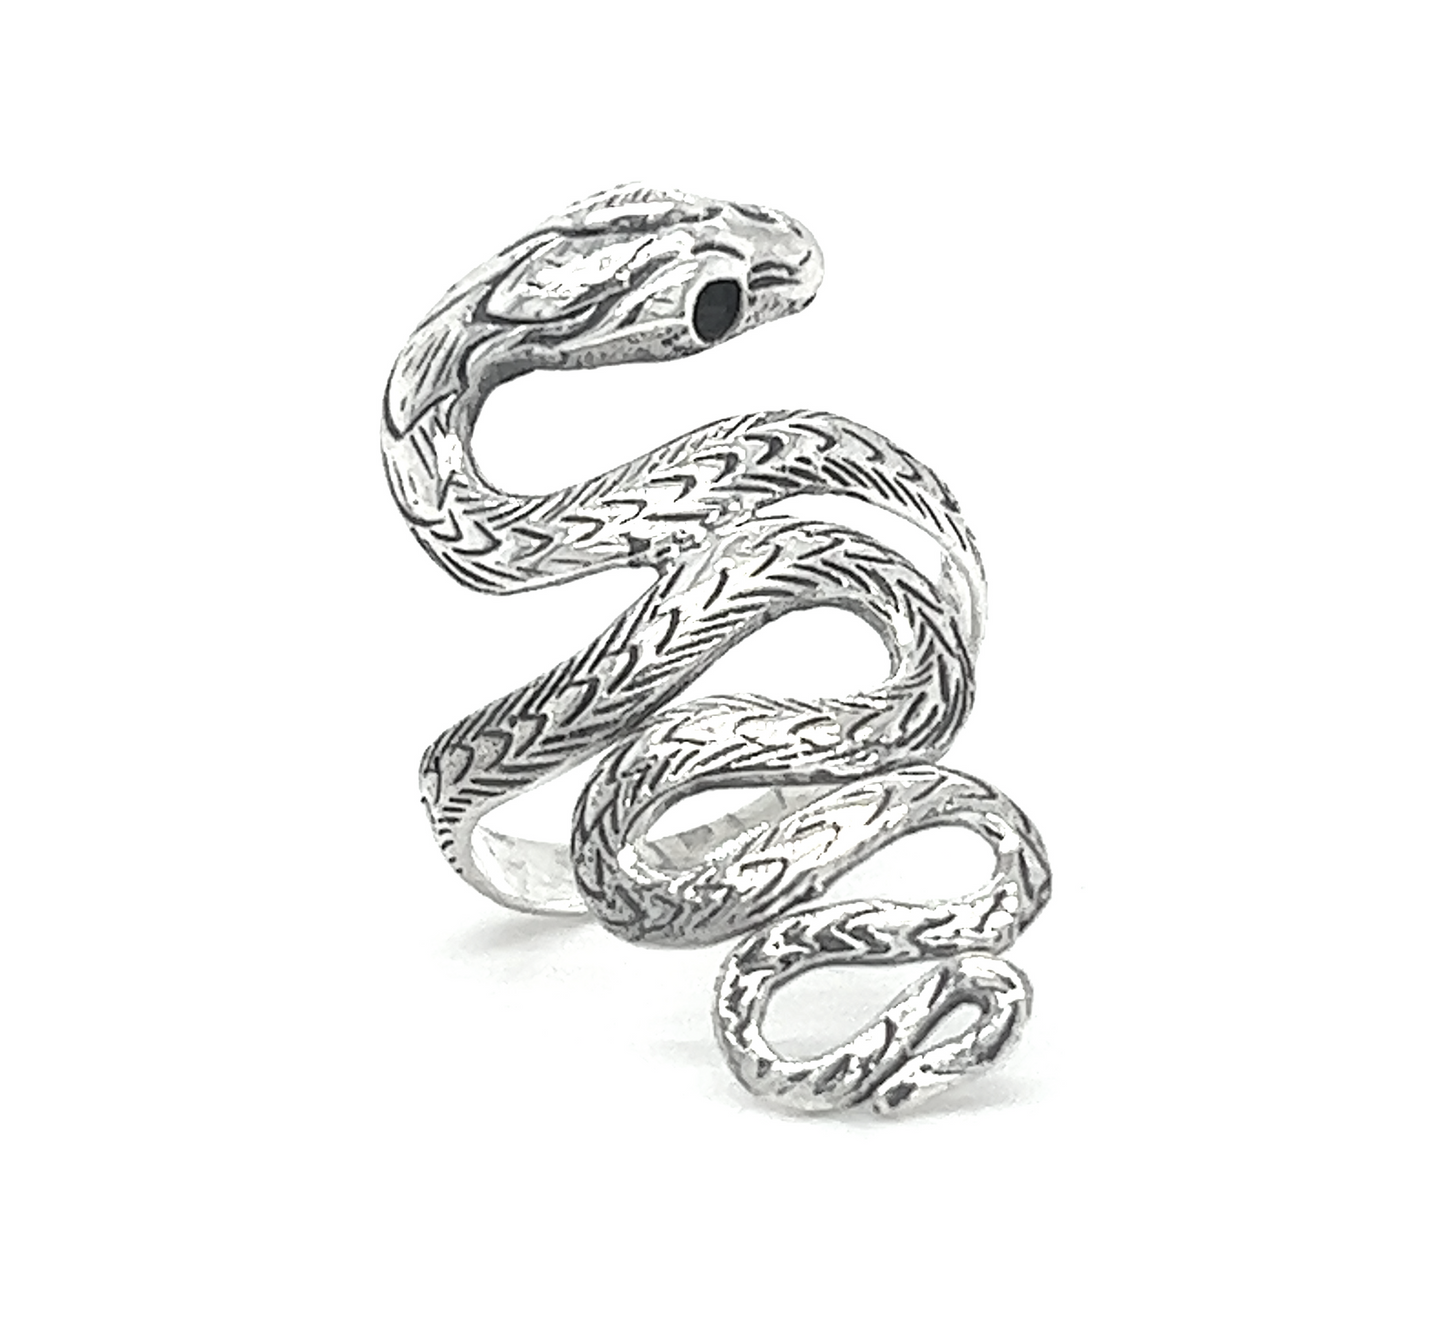 Captivating Statement Snake Ring with intricate scale detailing, coiled design, and a detailed head, on a white background.